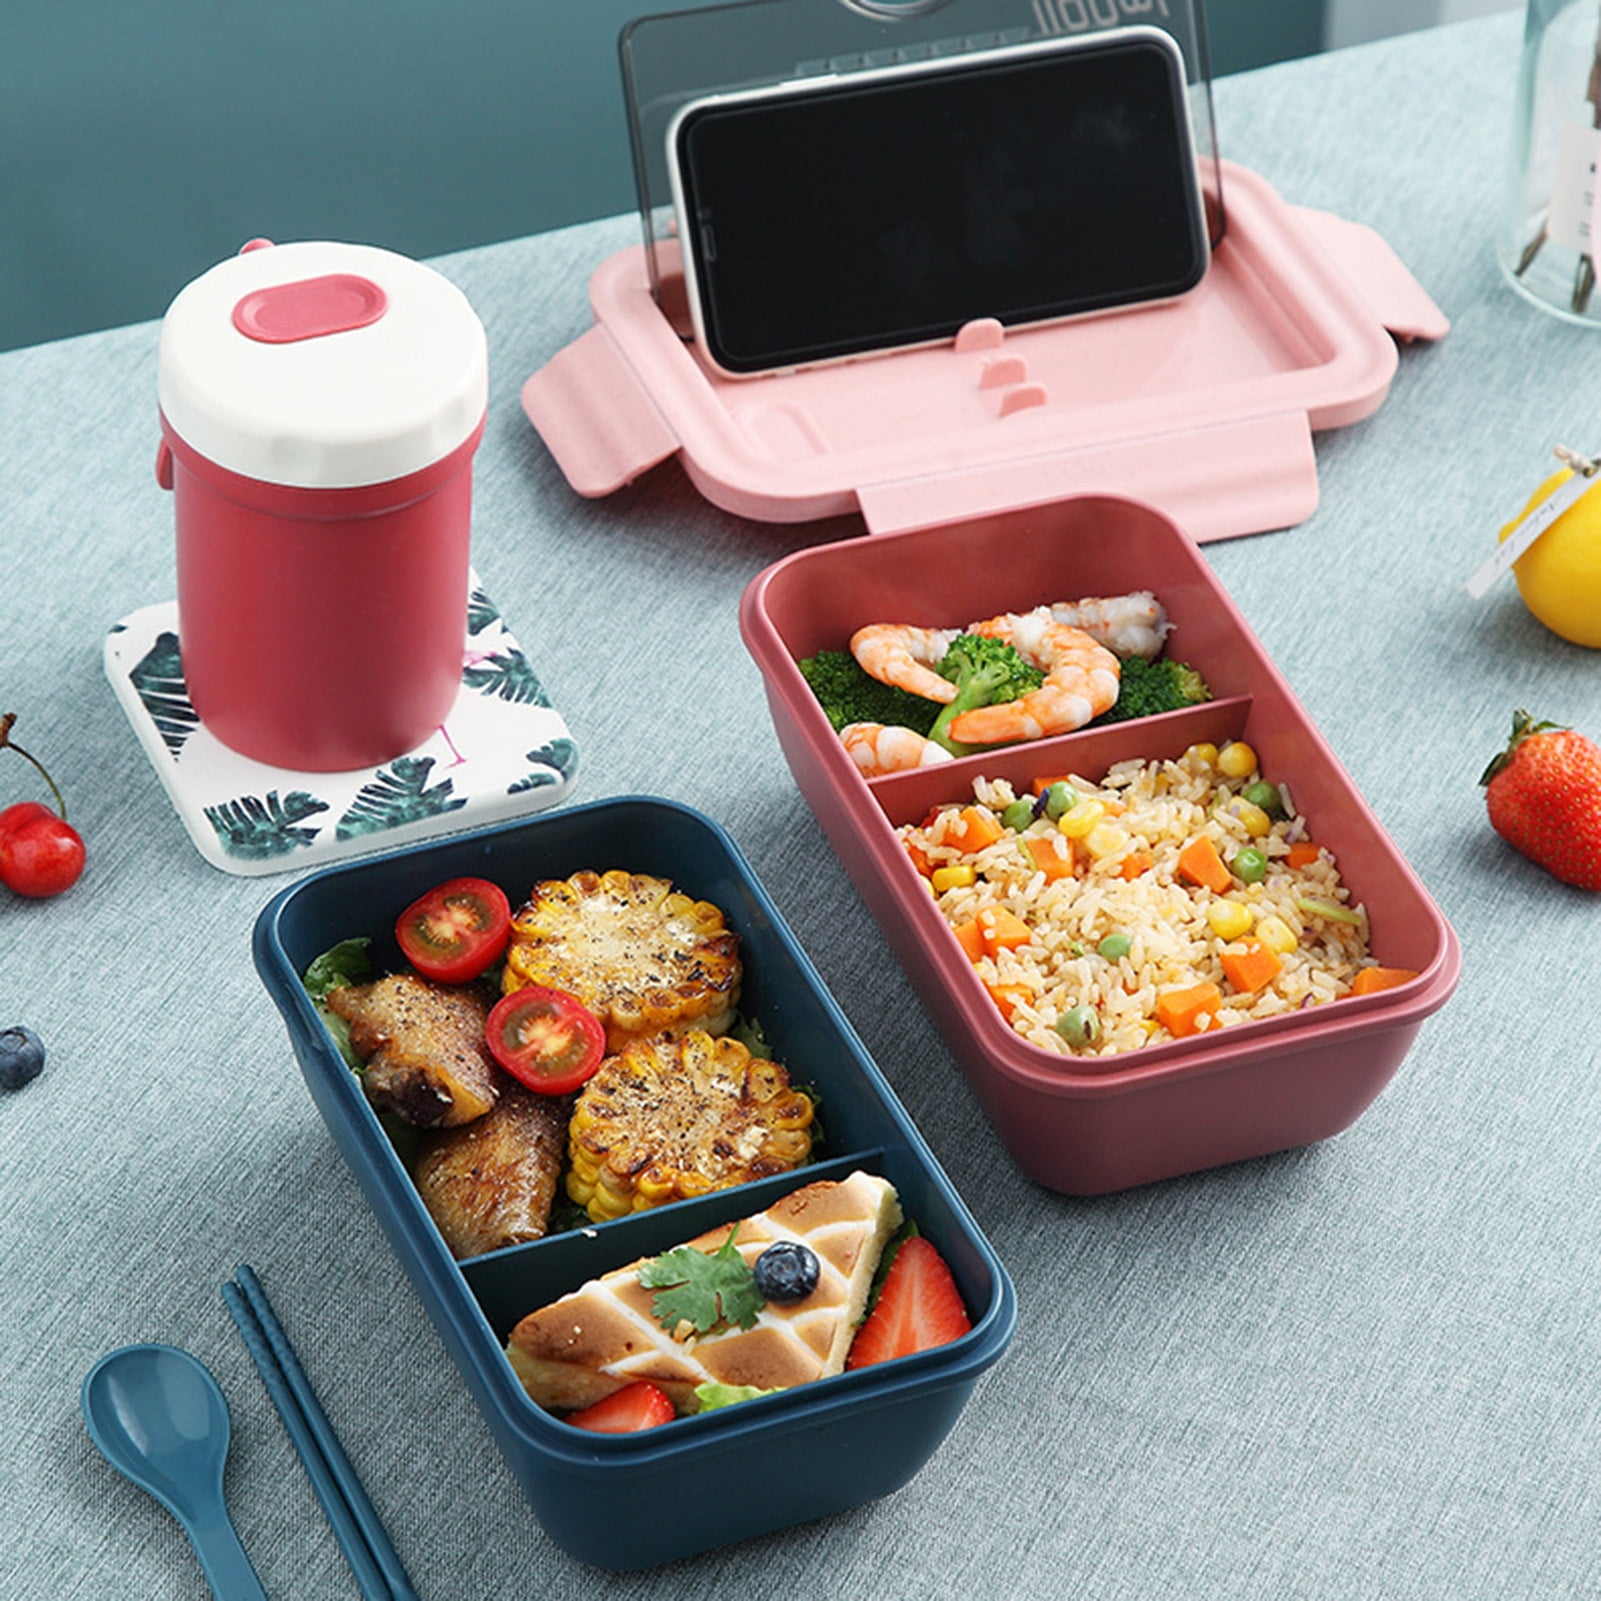 TWOKIWI Bento Lunch Box for Kids - Lunch Containers - Kids Lunch Box with 4  Compartments Includes Sa…See more TWOKIWI Bento Lunch Box for Kids - Lunch